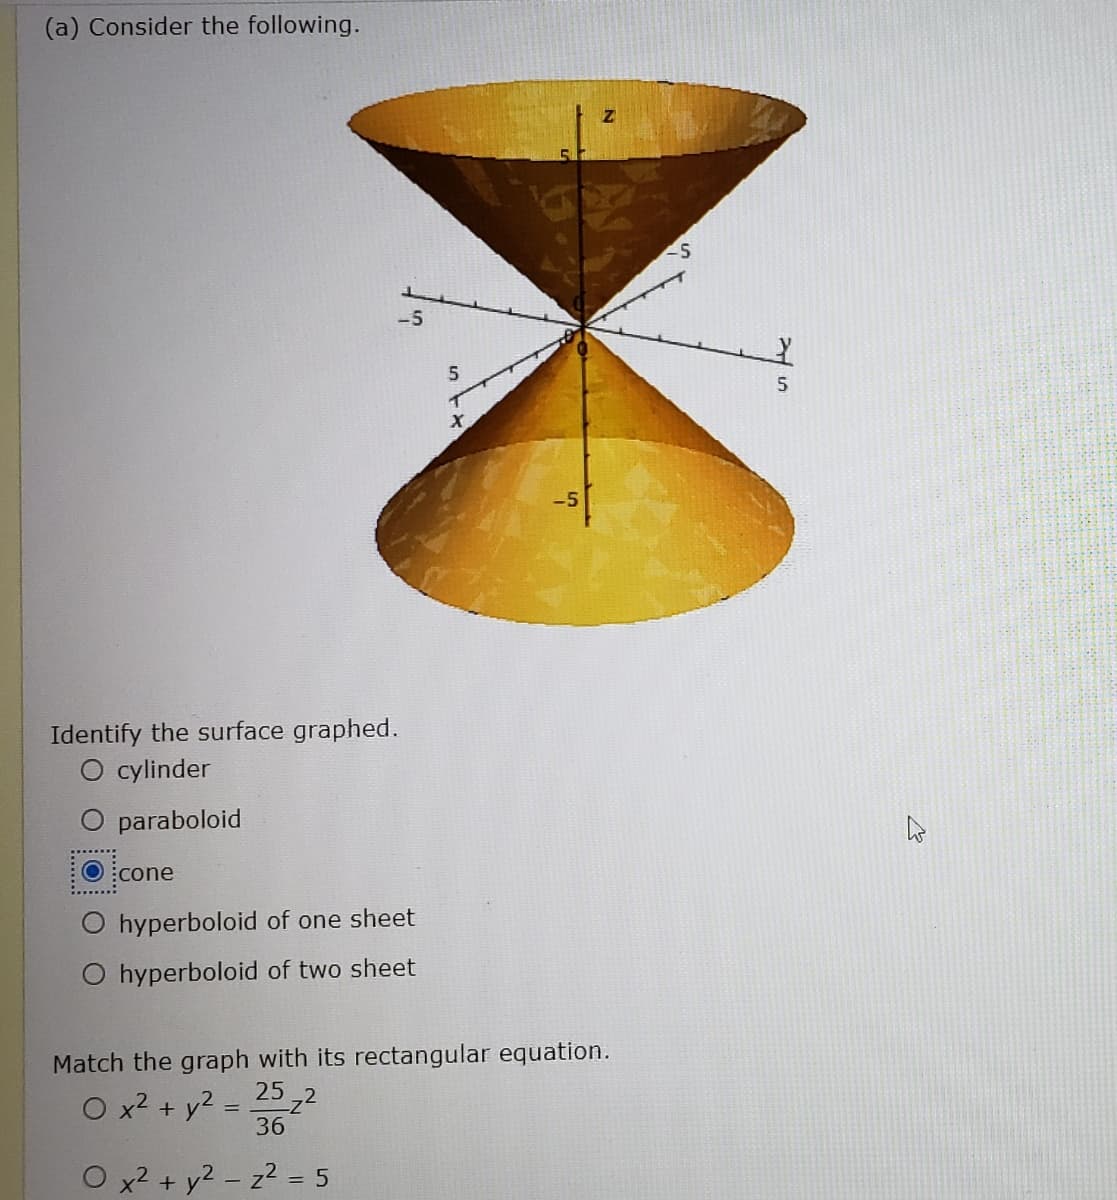 (a) Consider the following.
-5
Identify the surface graphed.
O cylinder
O paraboloid
O :cone
hyperboloid of one sheet
O hyperboloid of two sheet
Match the graph with its rectangular equation.
25
O x2 + y2
36
x2 + y2 - z2 = 5
